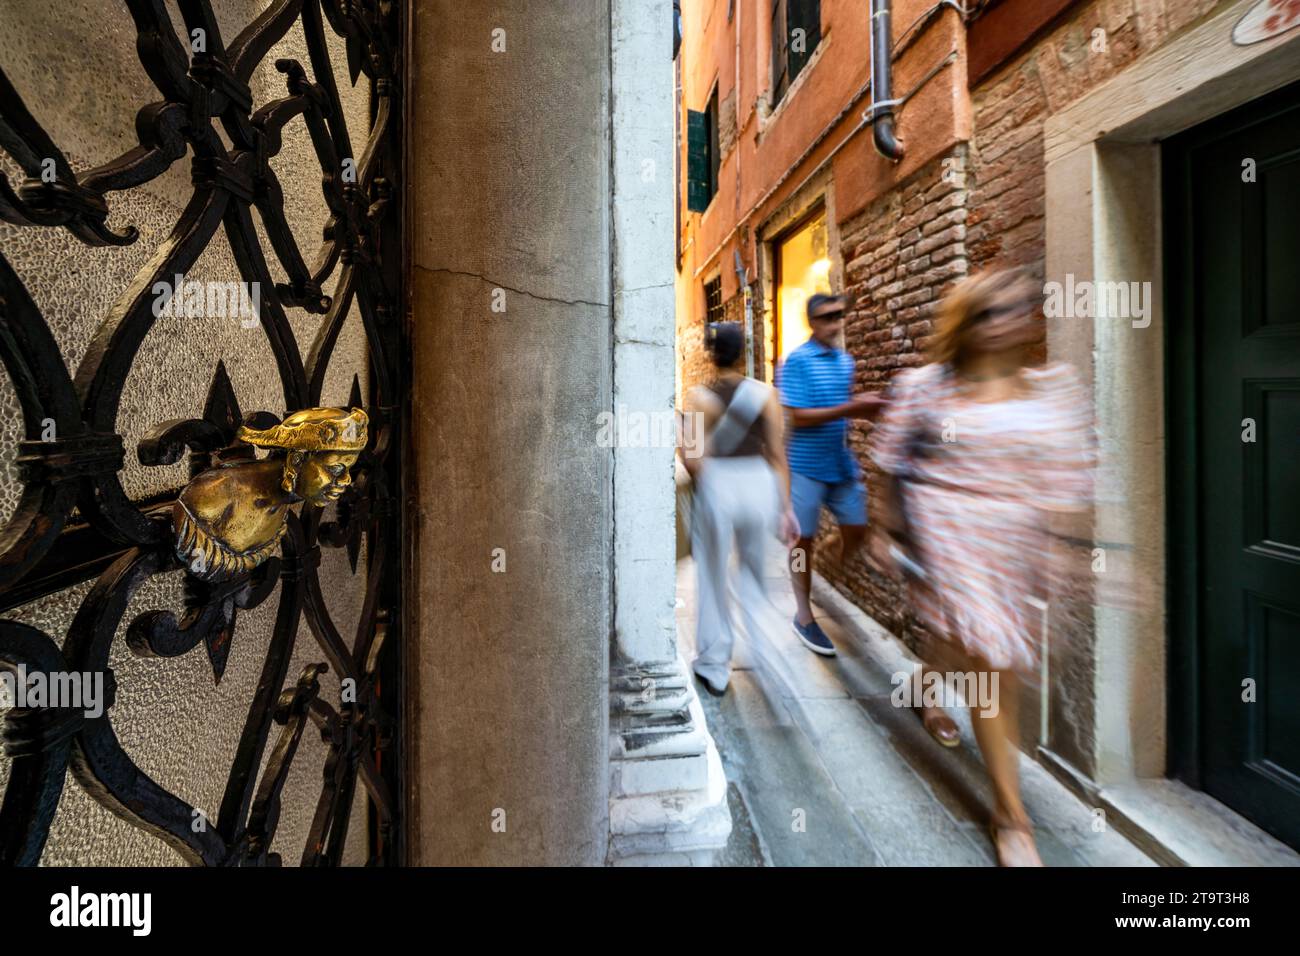 On a narrow alleyway in Venice, Italy Stock Photo